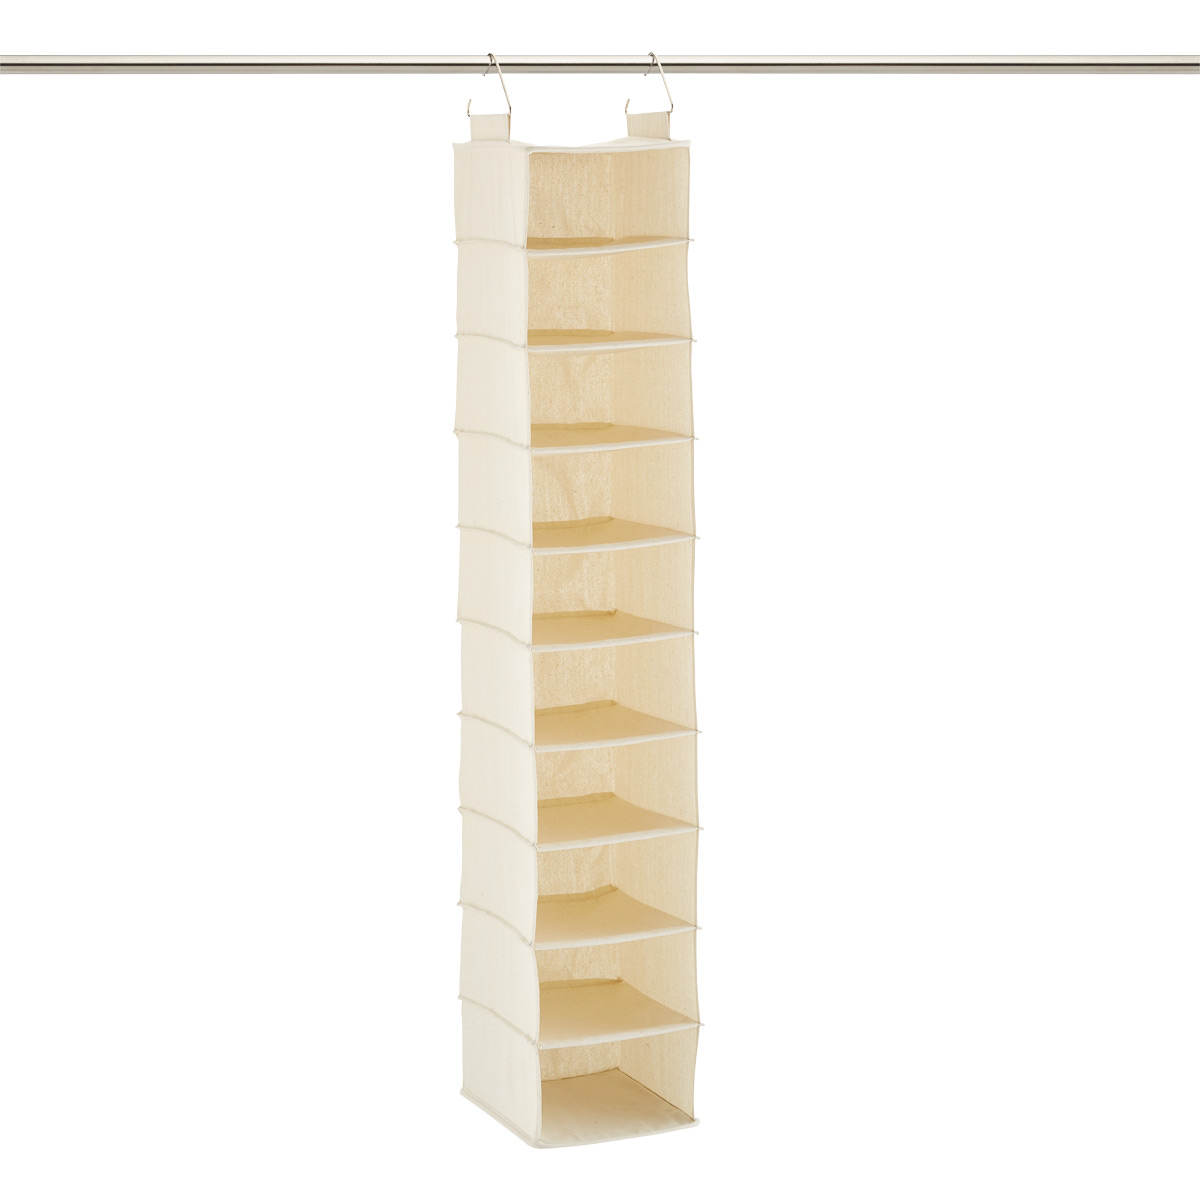 https://www.containerstore.com/catalogimages/420179/10085771-wide-10-compartment-hanging.jpg